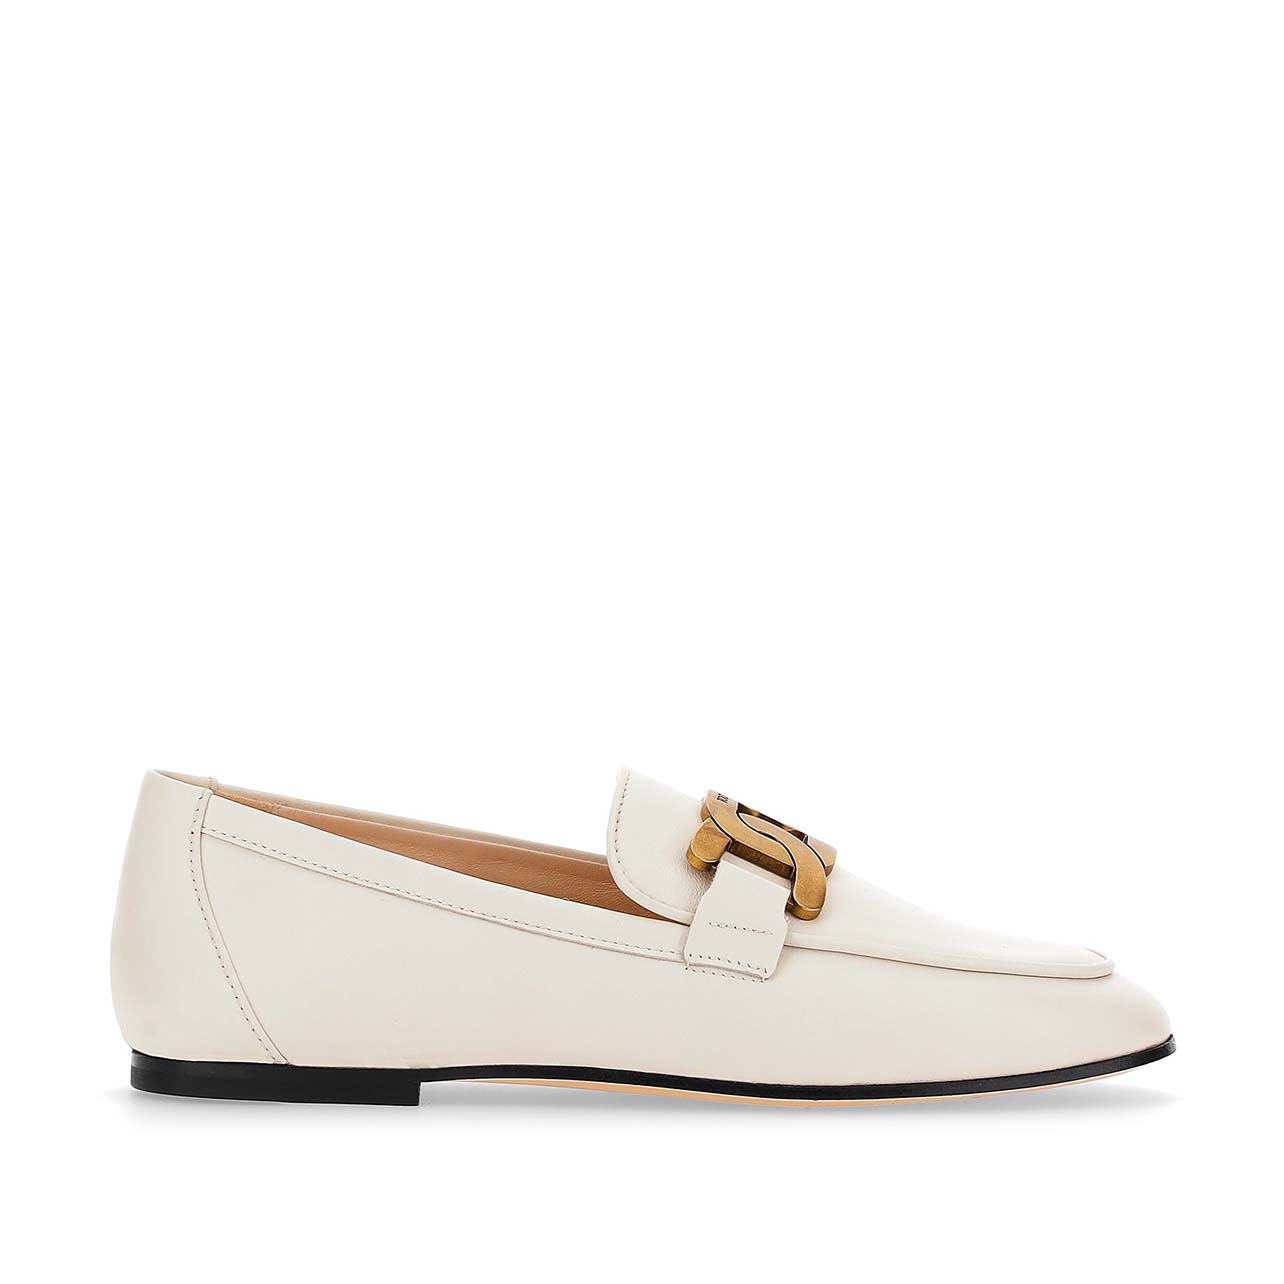 Tod’s white loafers with gold chain detail at the toe